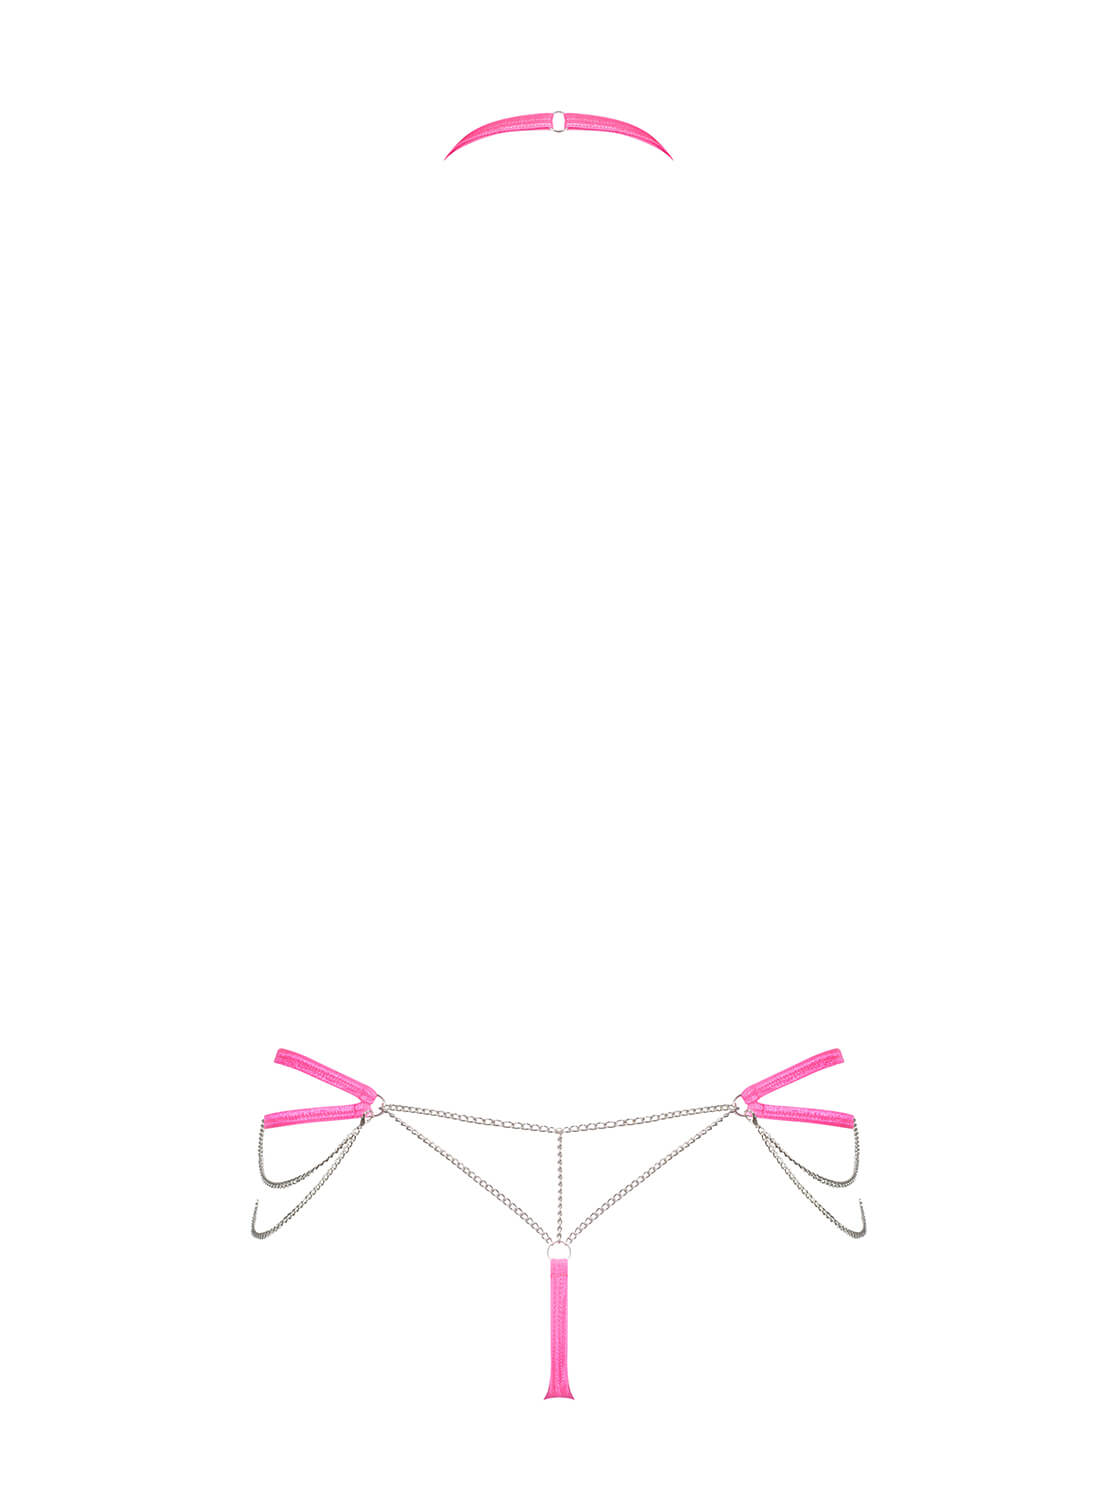 Chainty Set String with double straps in neon pink, which is connected with removable chains to an elastic, adjustable halter neck